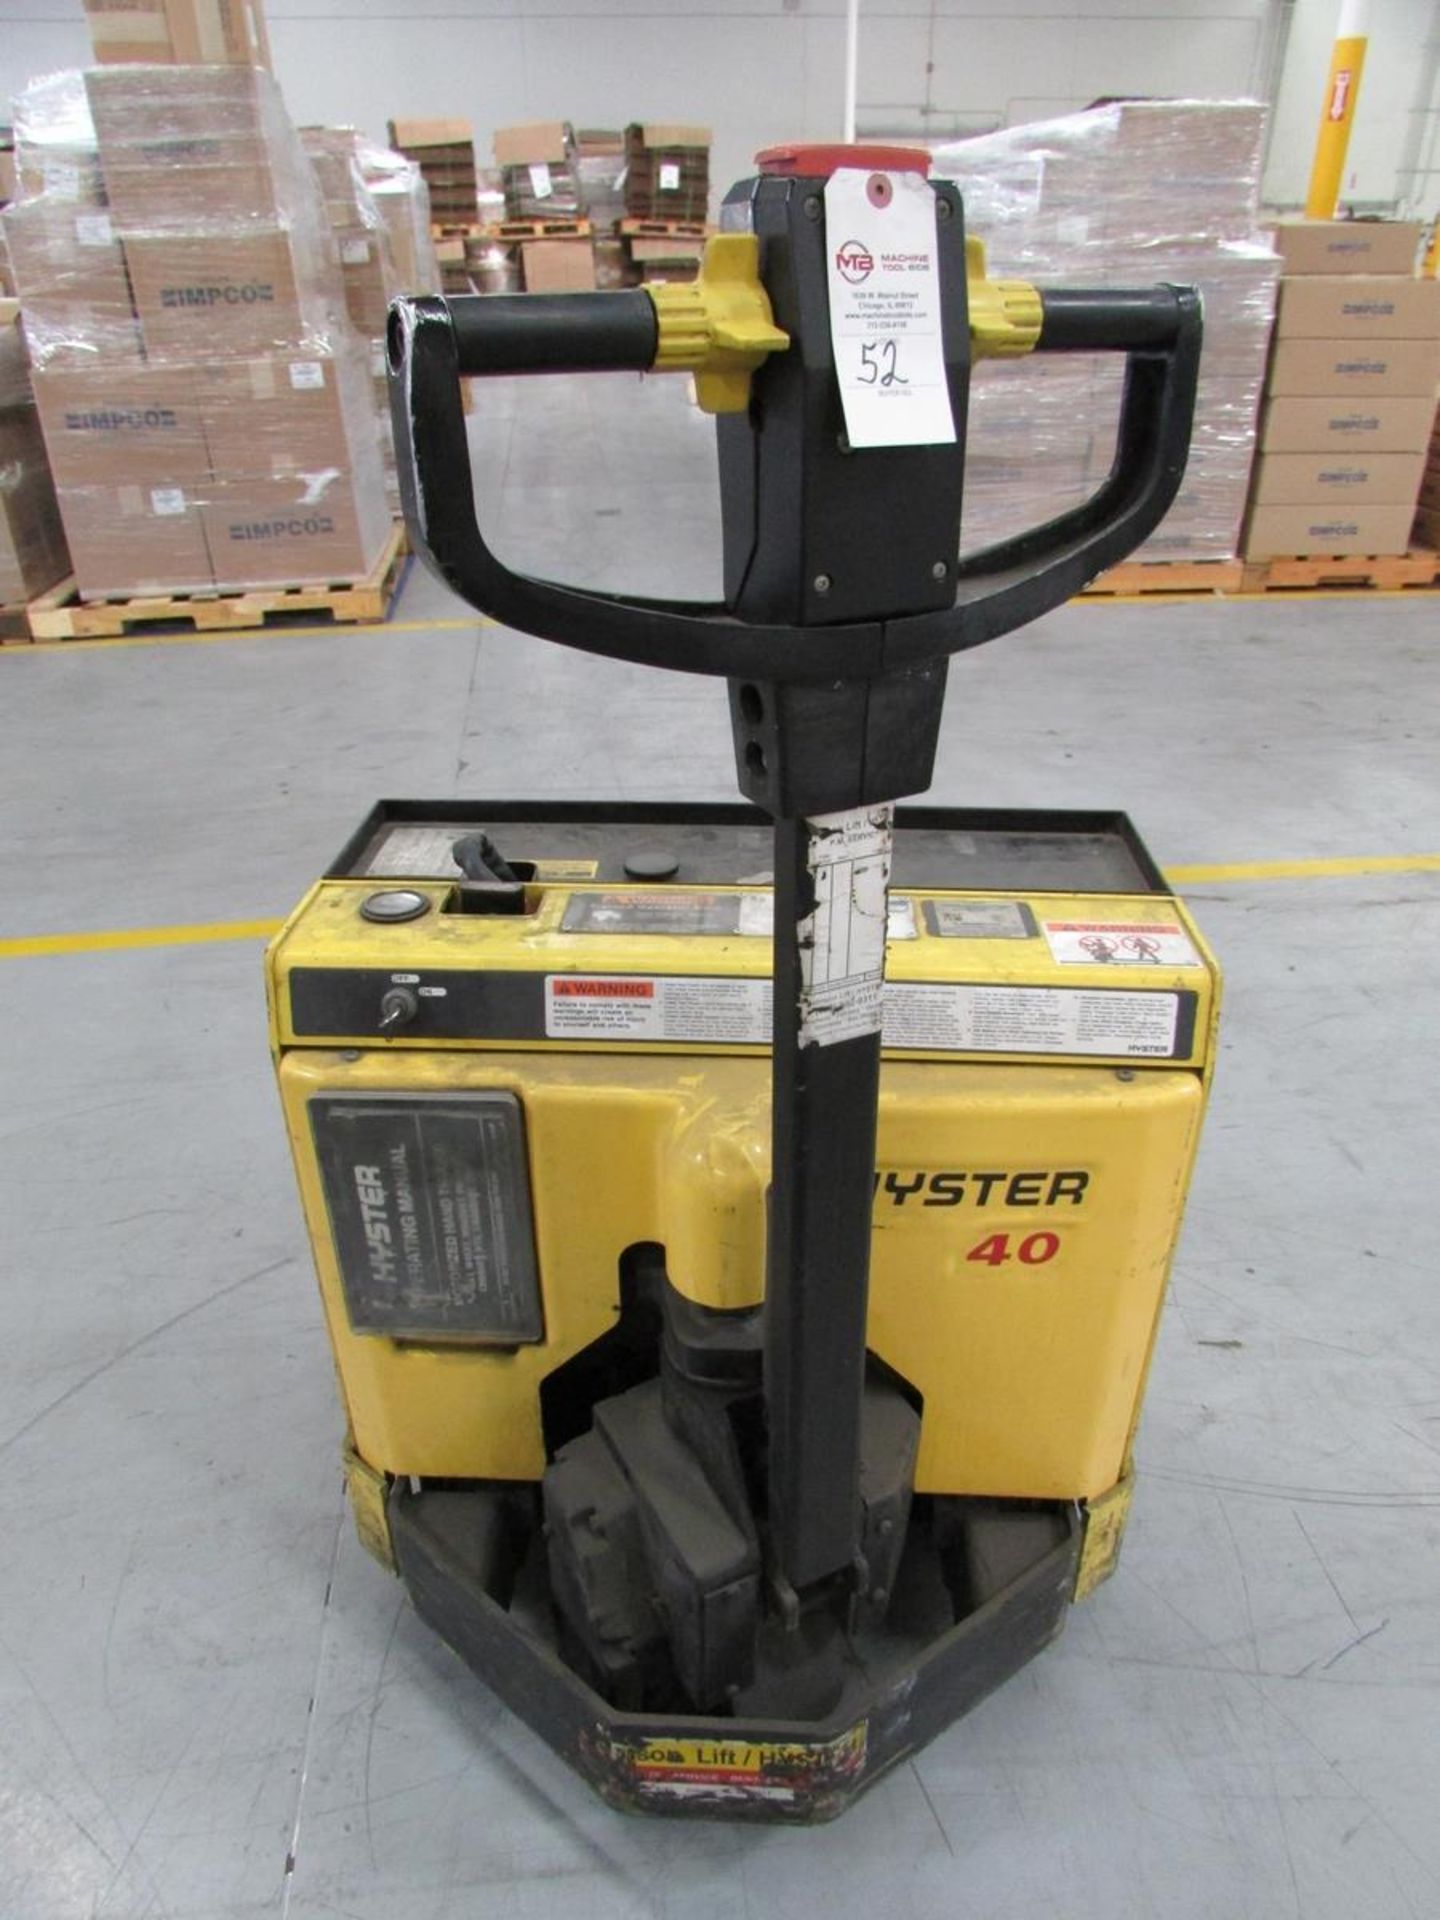 Hyster W40XT 4,000Lb 24V Electric Pallet Lift Truck (2000) - Image 14 of 24